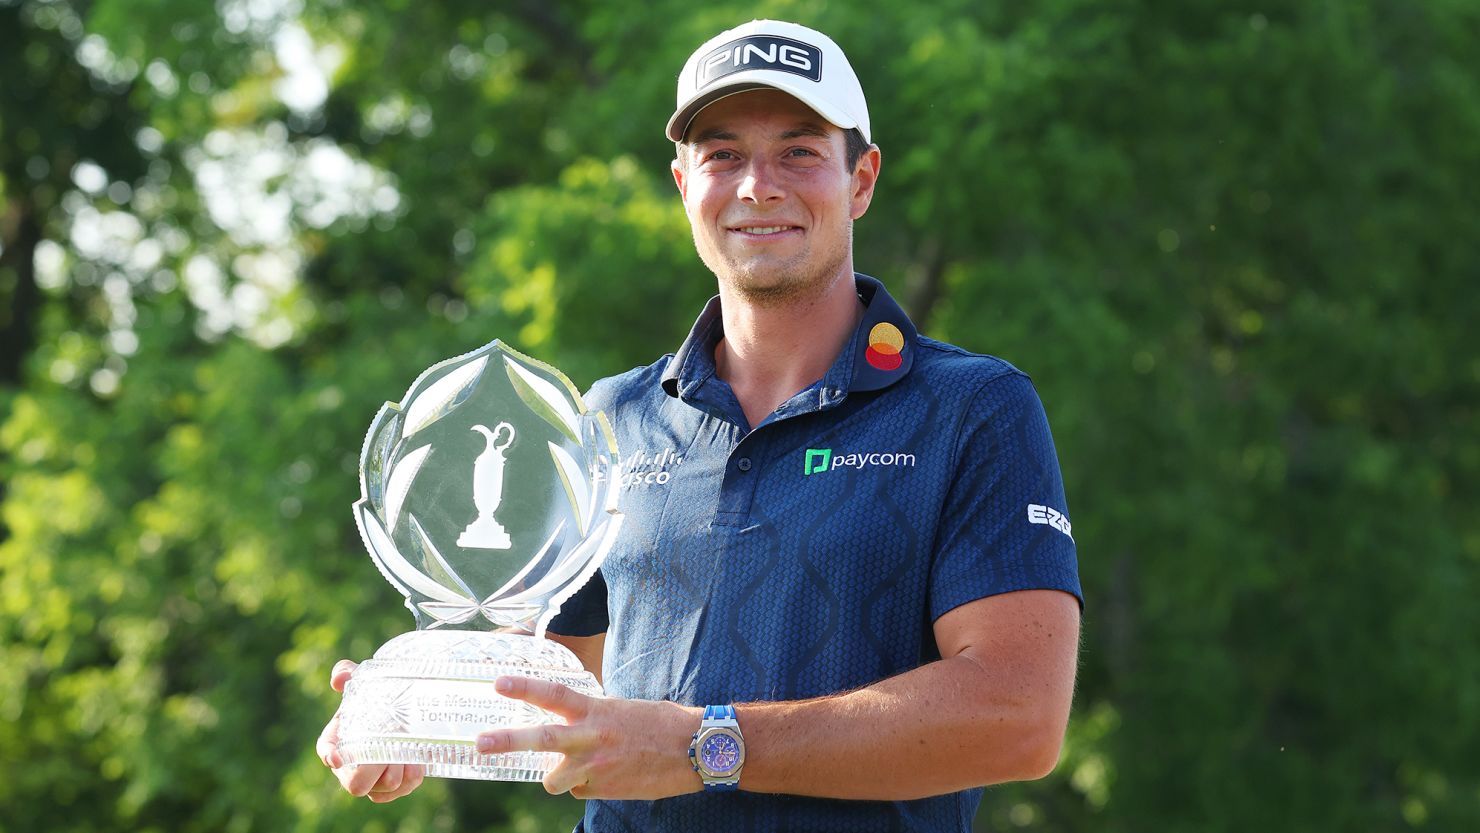  Viktor Hovland poses with the trophy after winning the Memorial Tournament in a playoff over Denny McCarthy of the United States at Muirfield Village Golf Club in Dublin, Ohio.